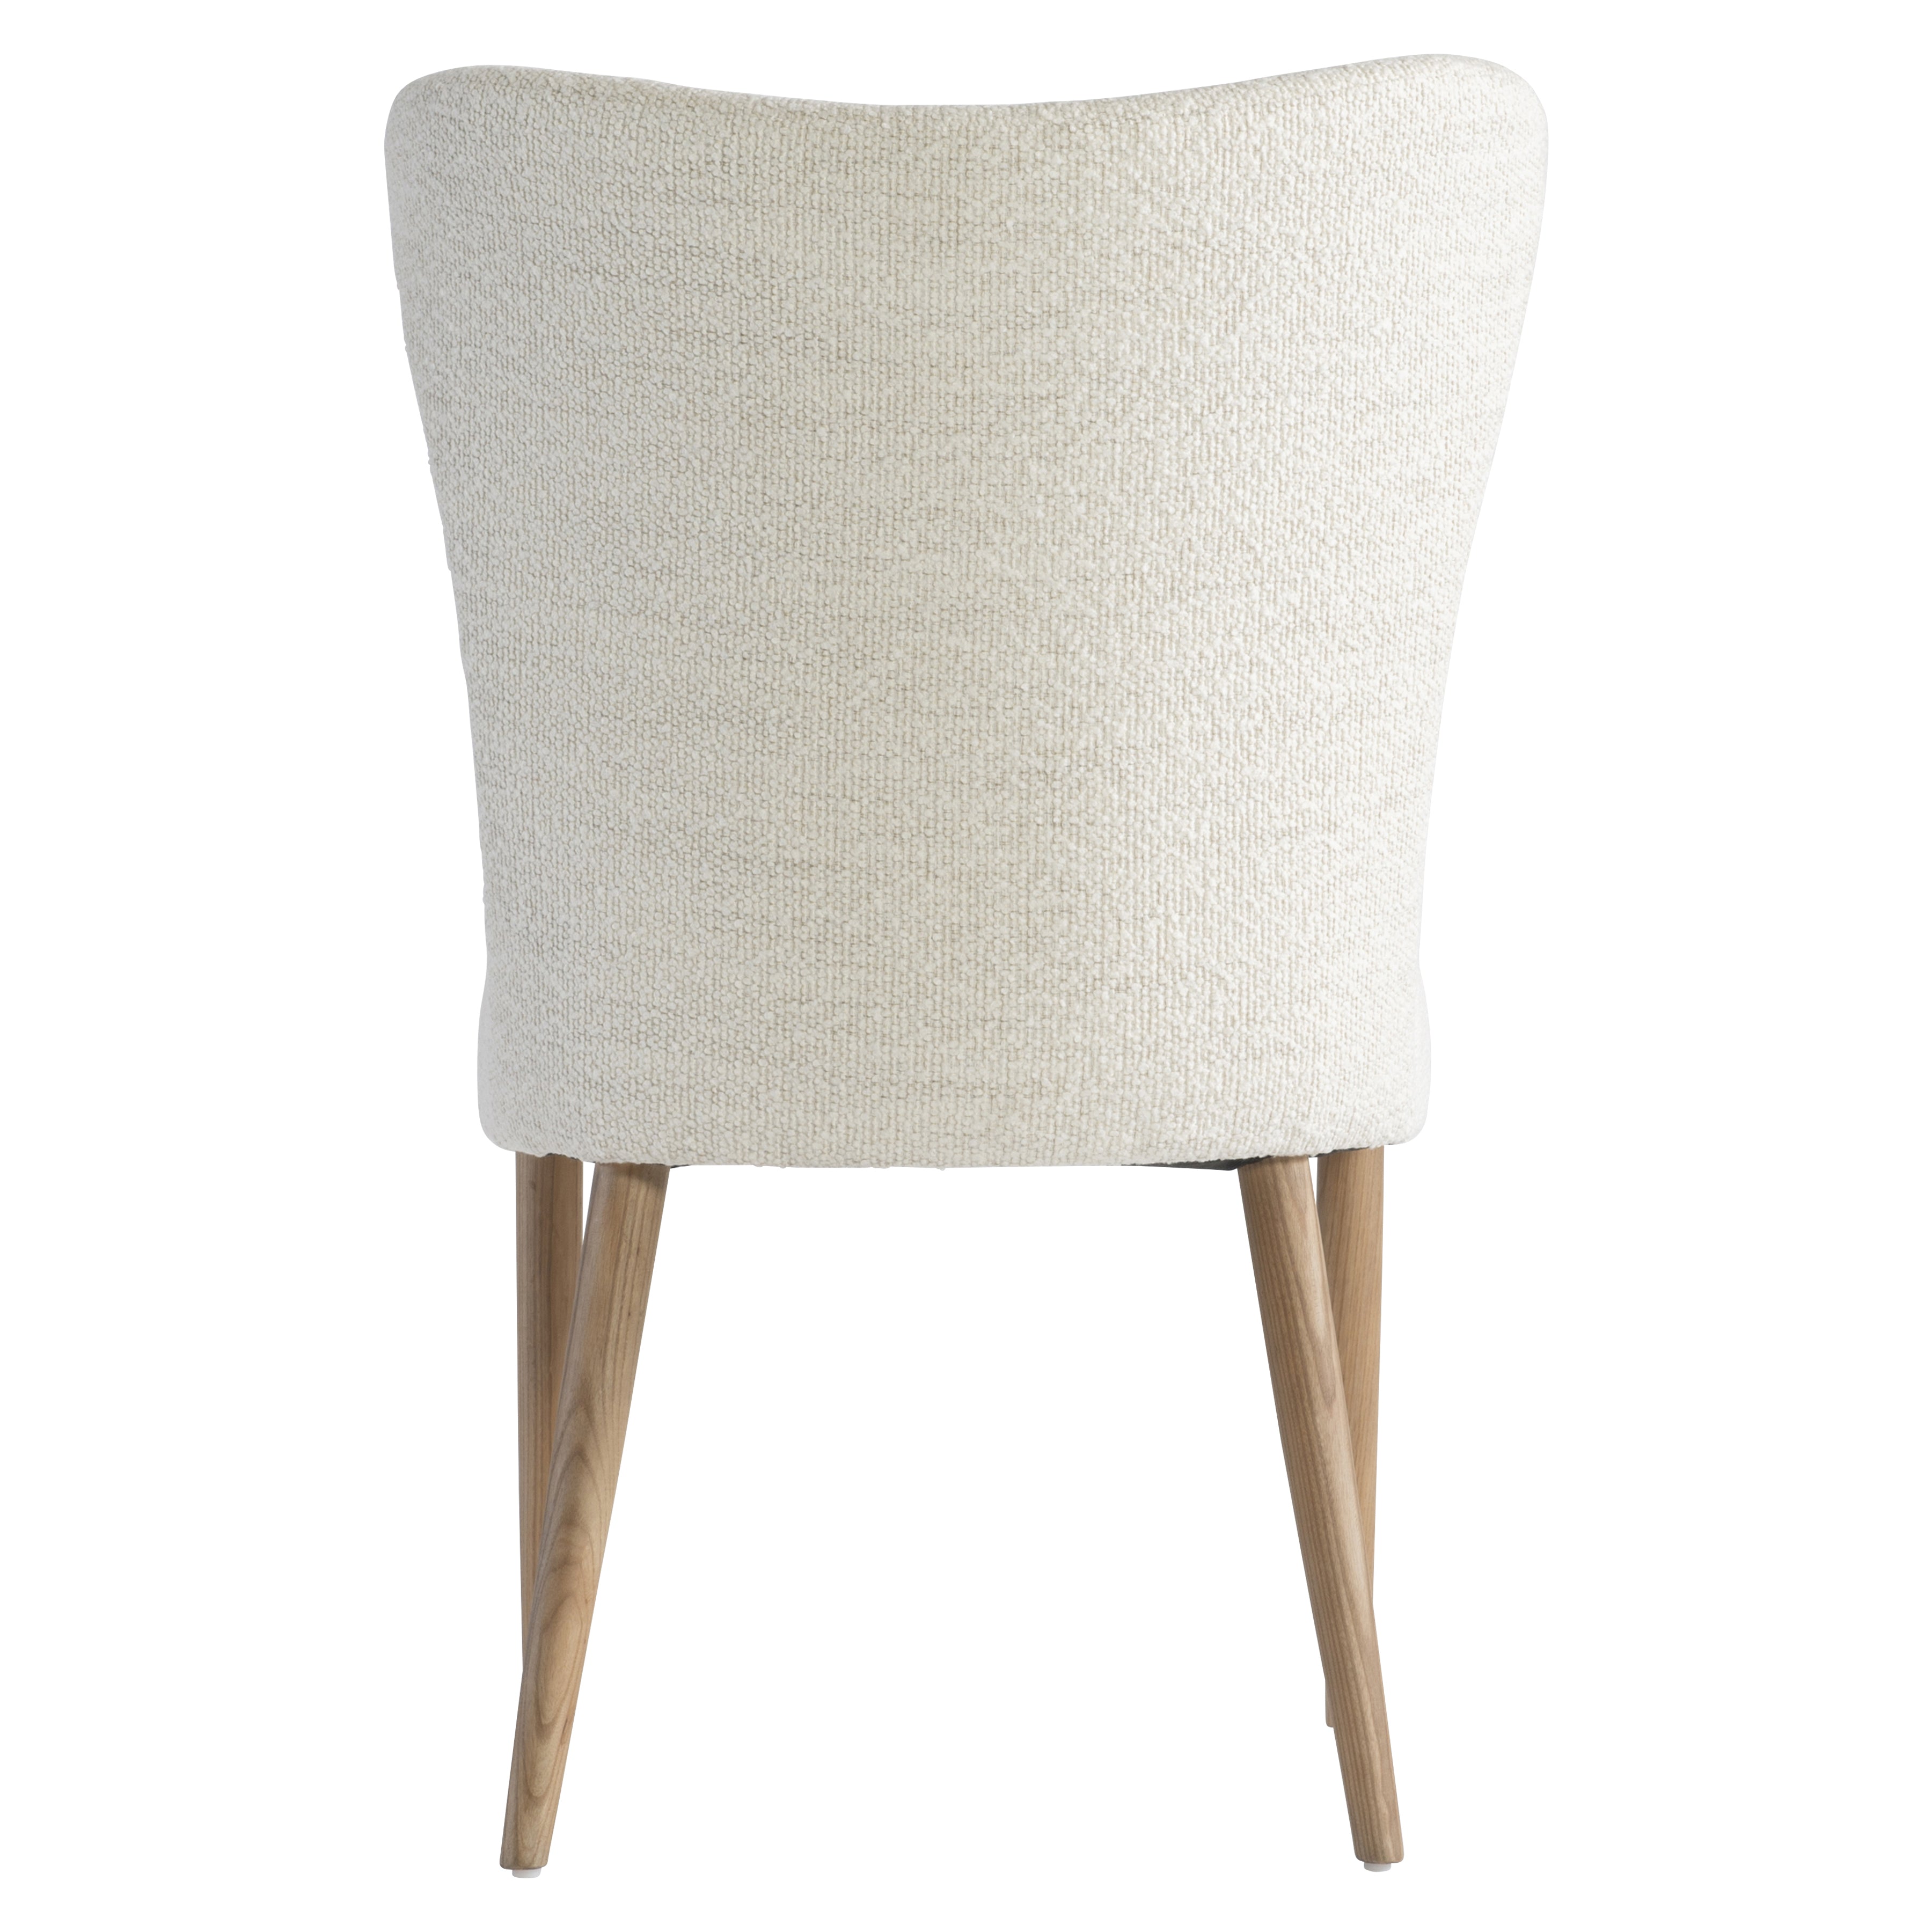 Modulum Side Chair with Curved Back